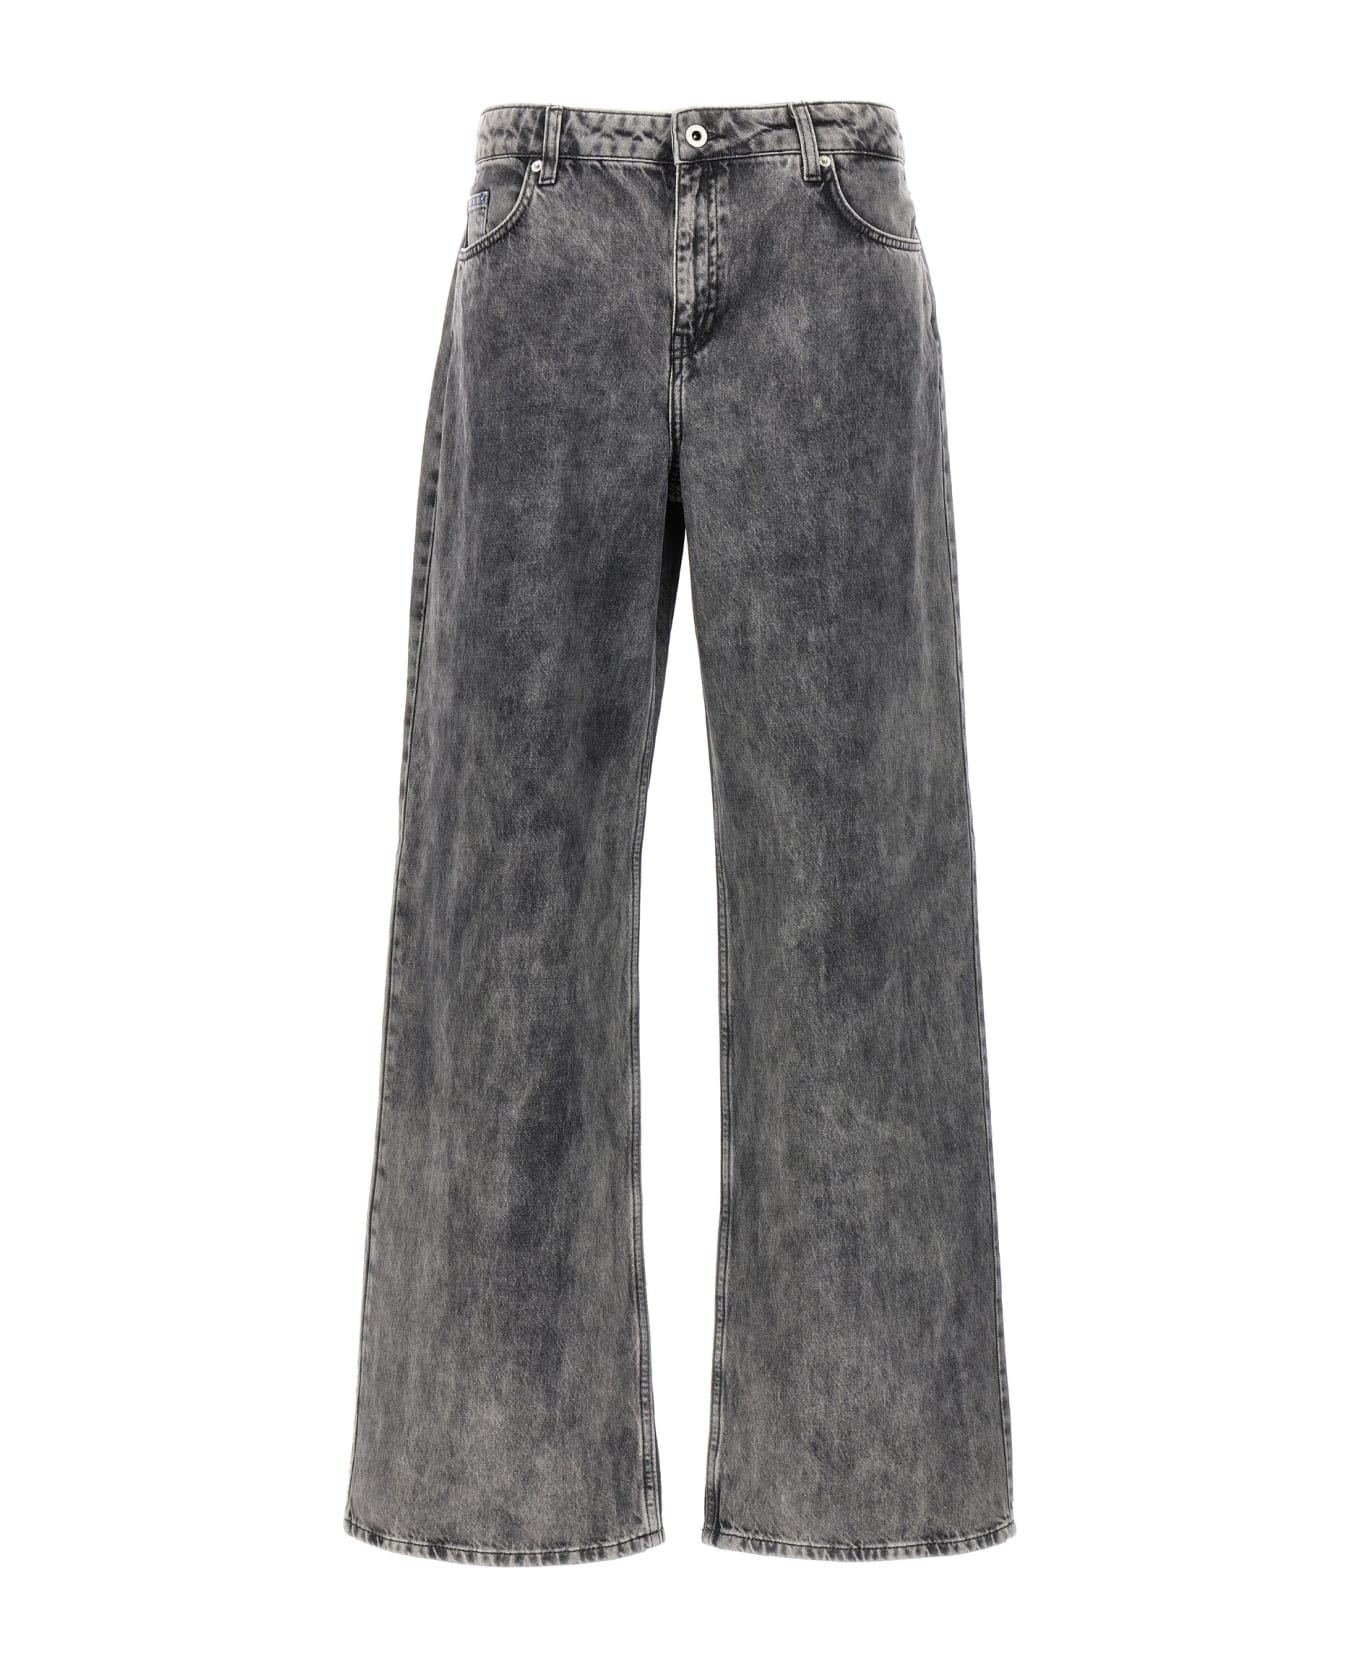 Karl Lagerfeld 'relaxed' Jeans - Gray